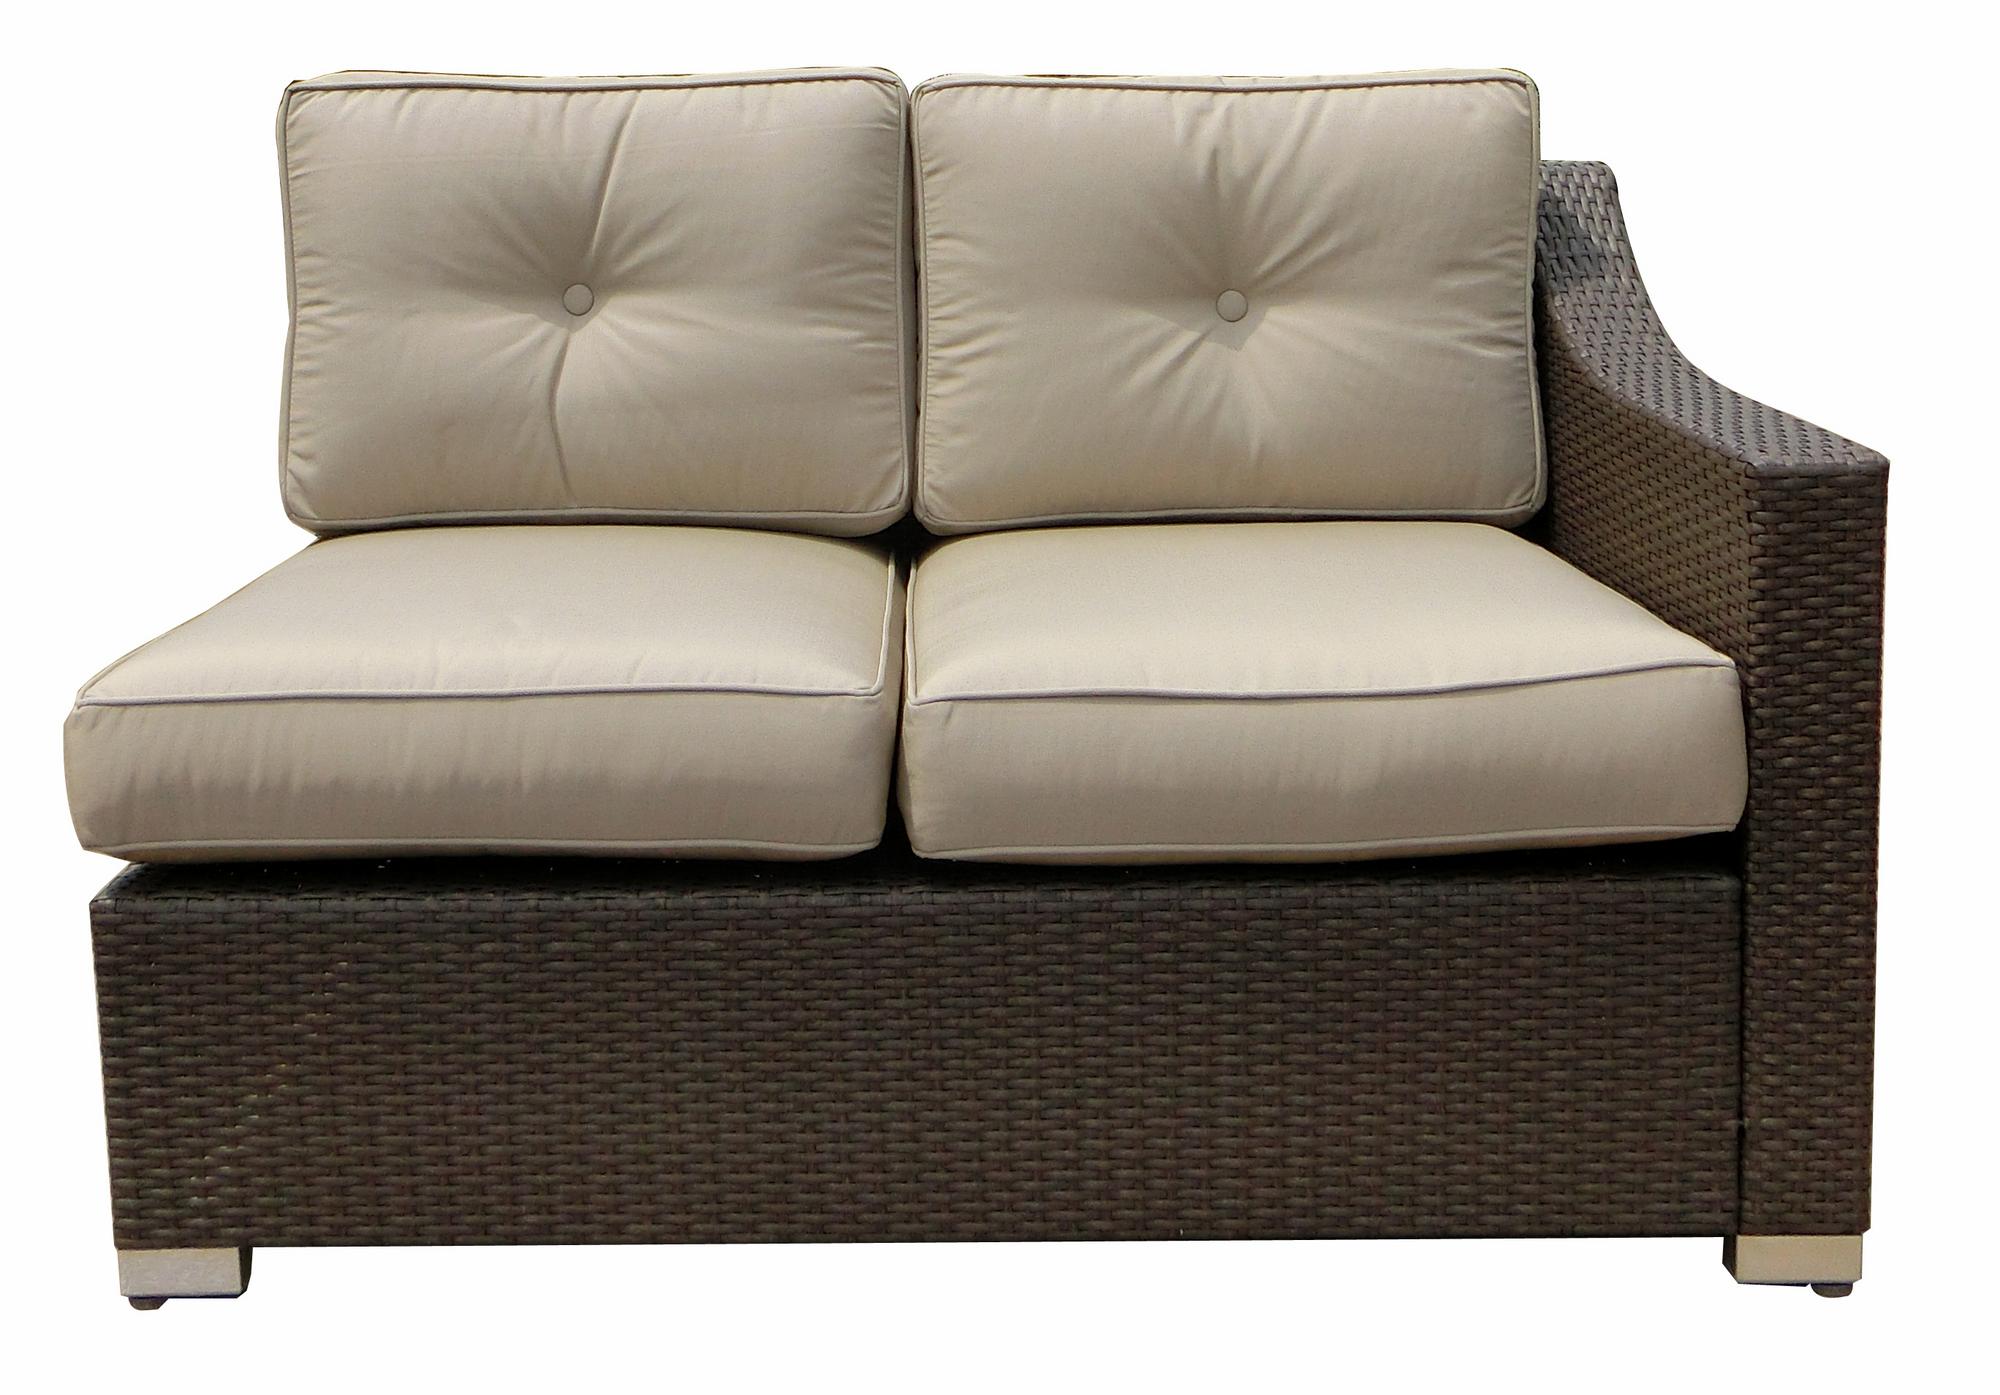 Sb-3775-07 South Beach Wicker Patio Left Arm Sectional Loveseat